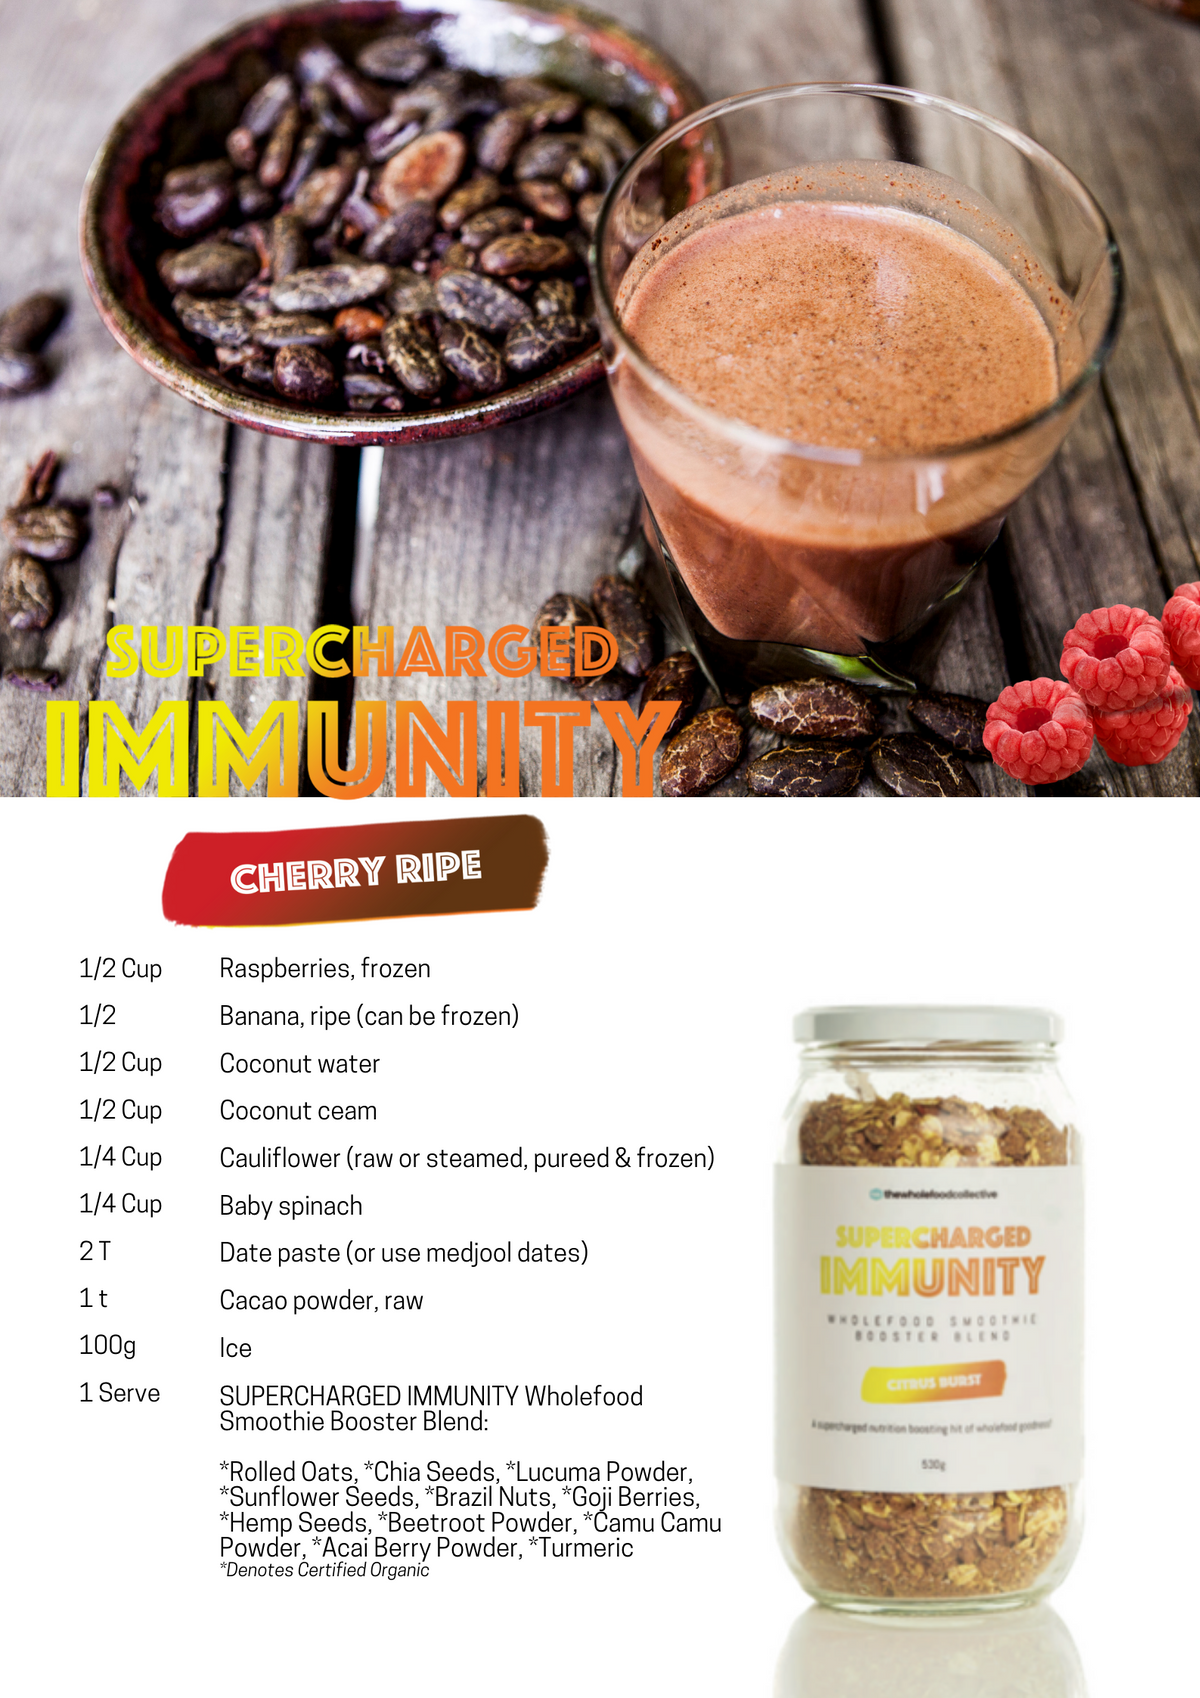 Immunity Smoothie Booster